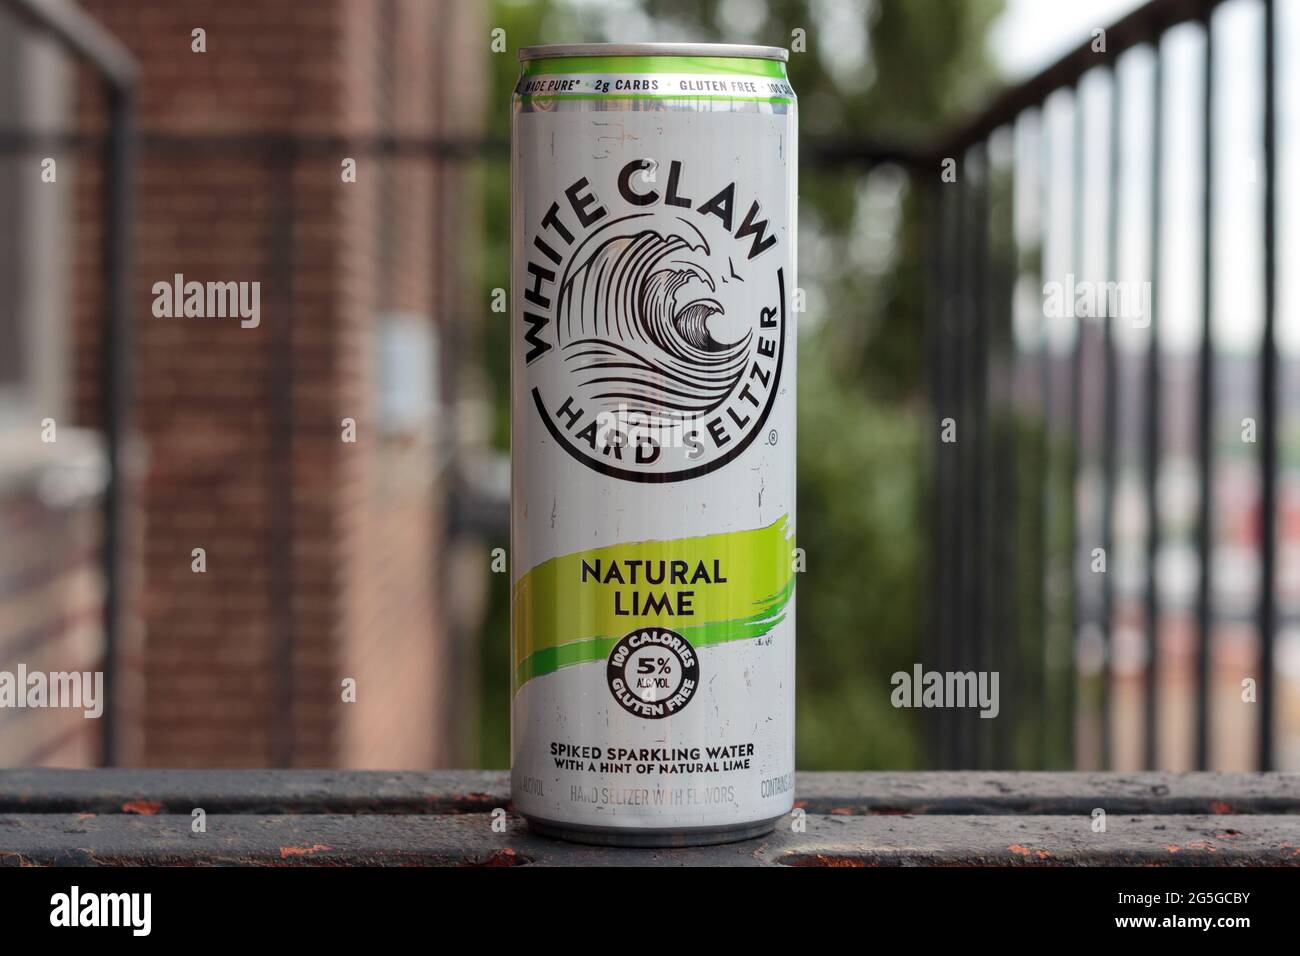 can of White Claw brand hard seltzer, spiked sparkling water, lime flavored, 5 percent alcohol, on a fire escape Stock Photo